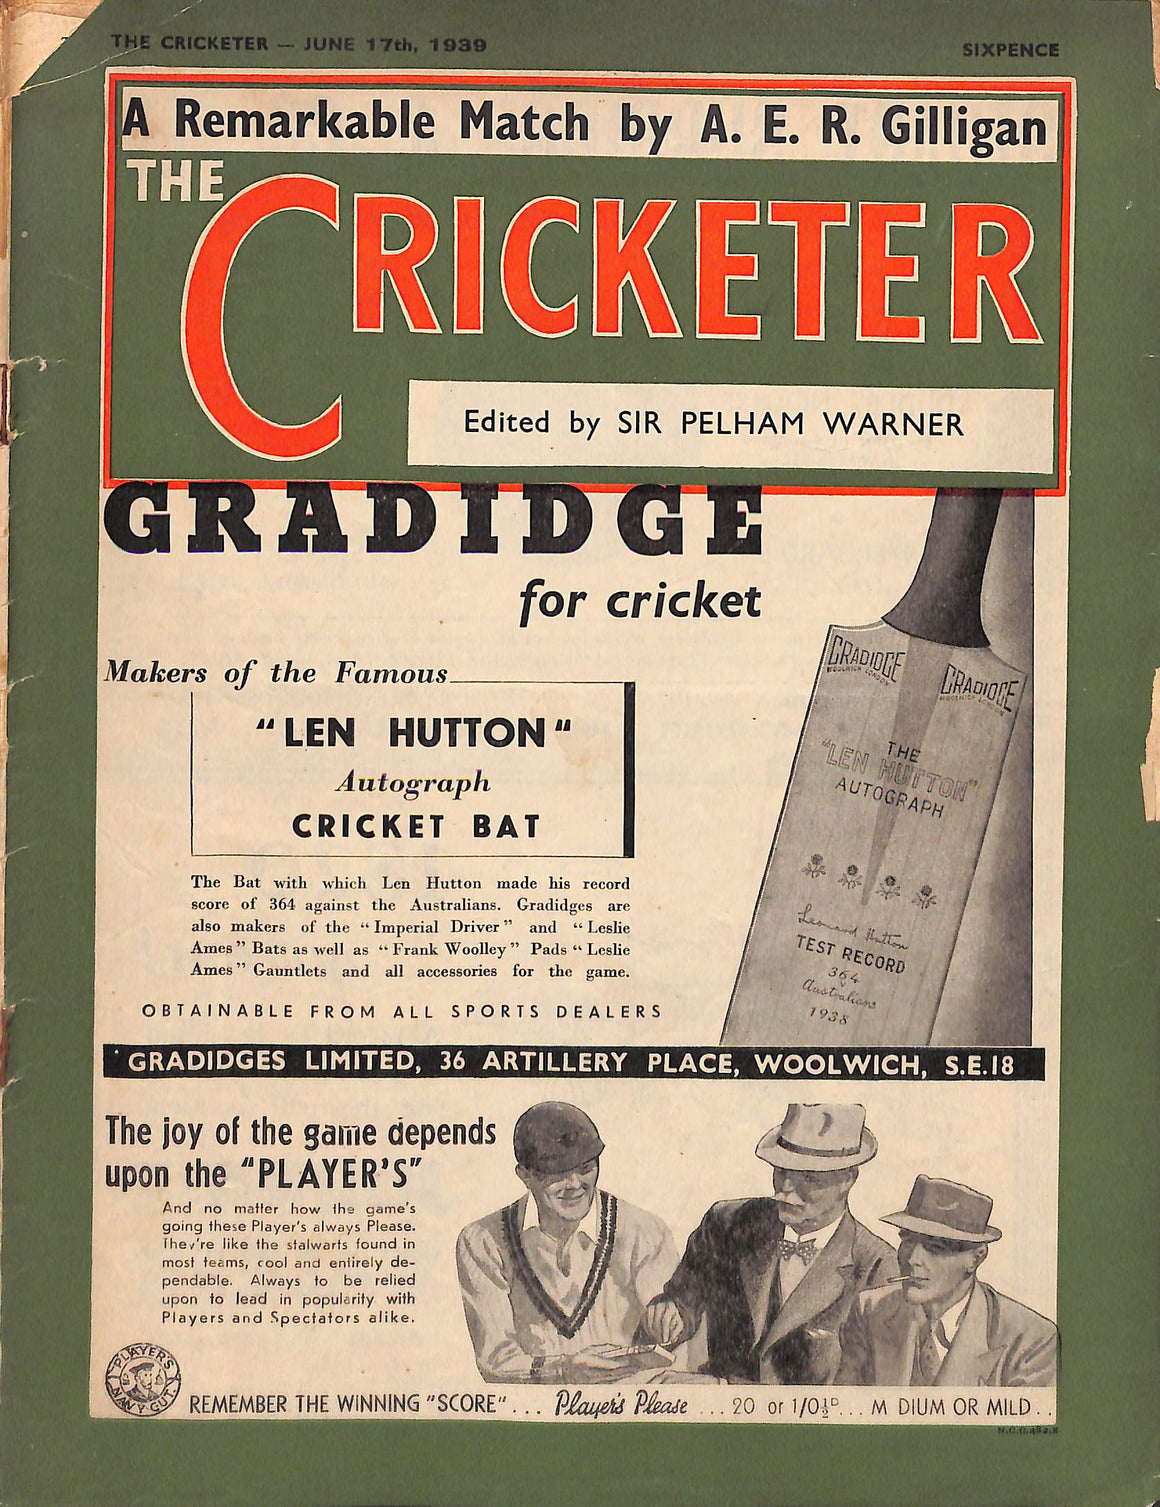 'The Cricketer - June 17th, 1939'